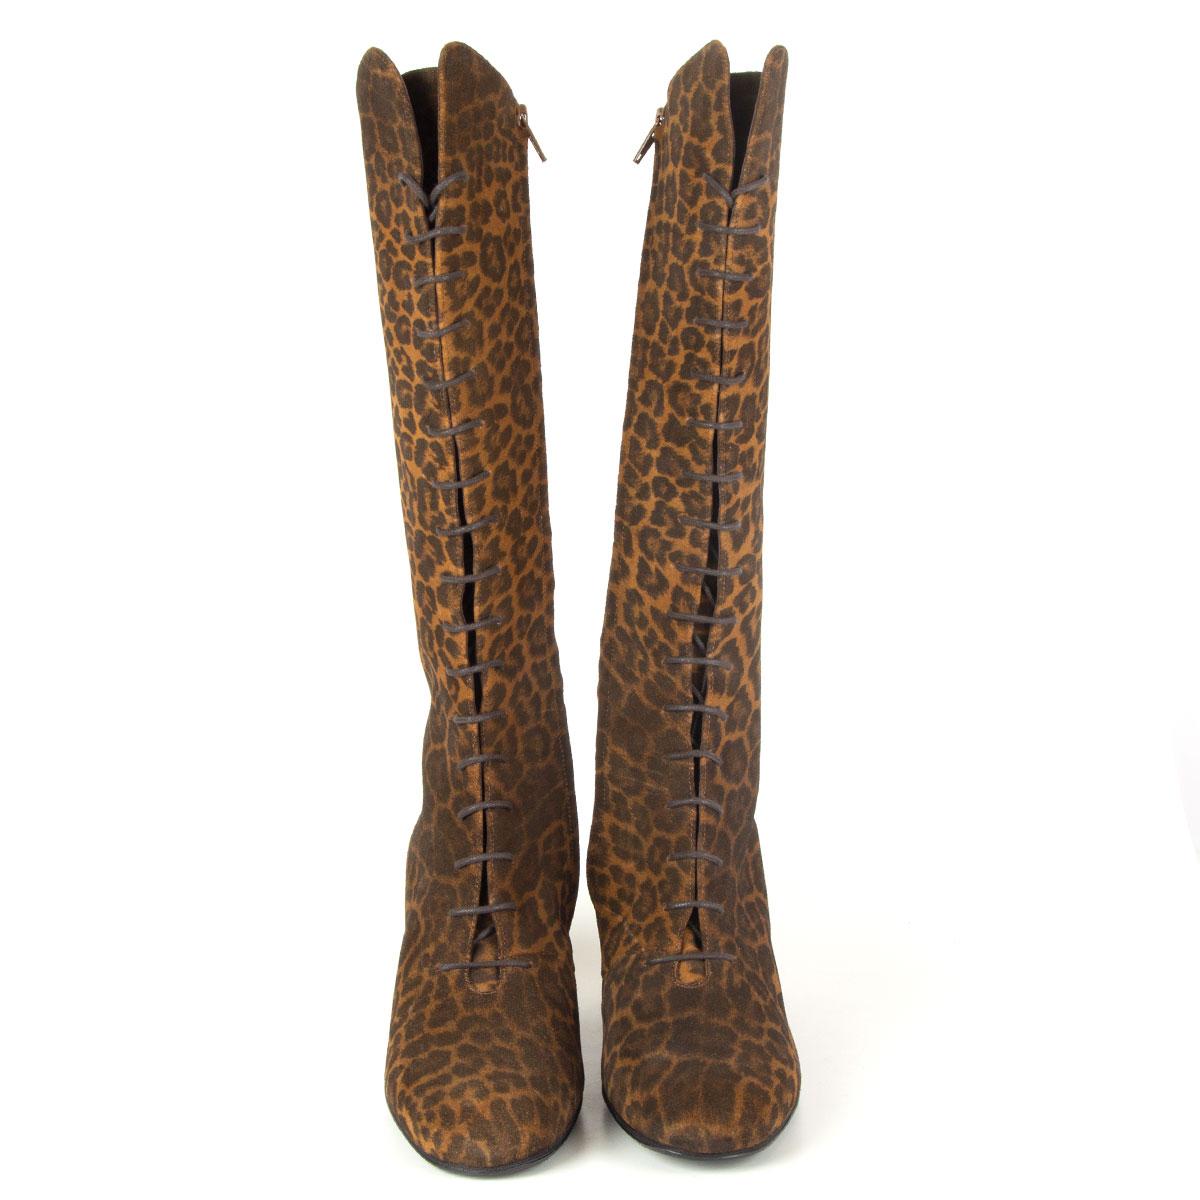 100% authentic Saint Laurent lace-up knee-high boots in camel and espresso brown leopard print suede. Lined in espresso brown calfskin. Open with a zipper on the inside. Brand new. Rubber sole has been added. 

Imprinted Size 40
Shoe Size 40
Inside